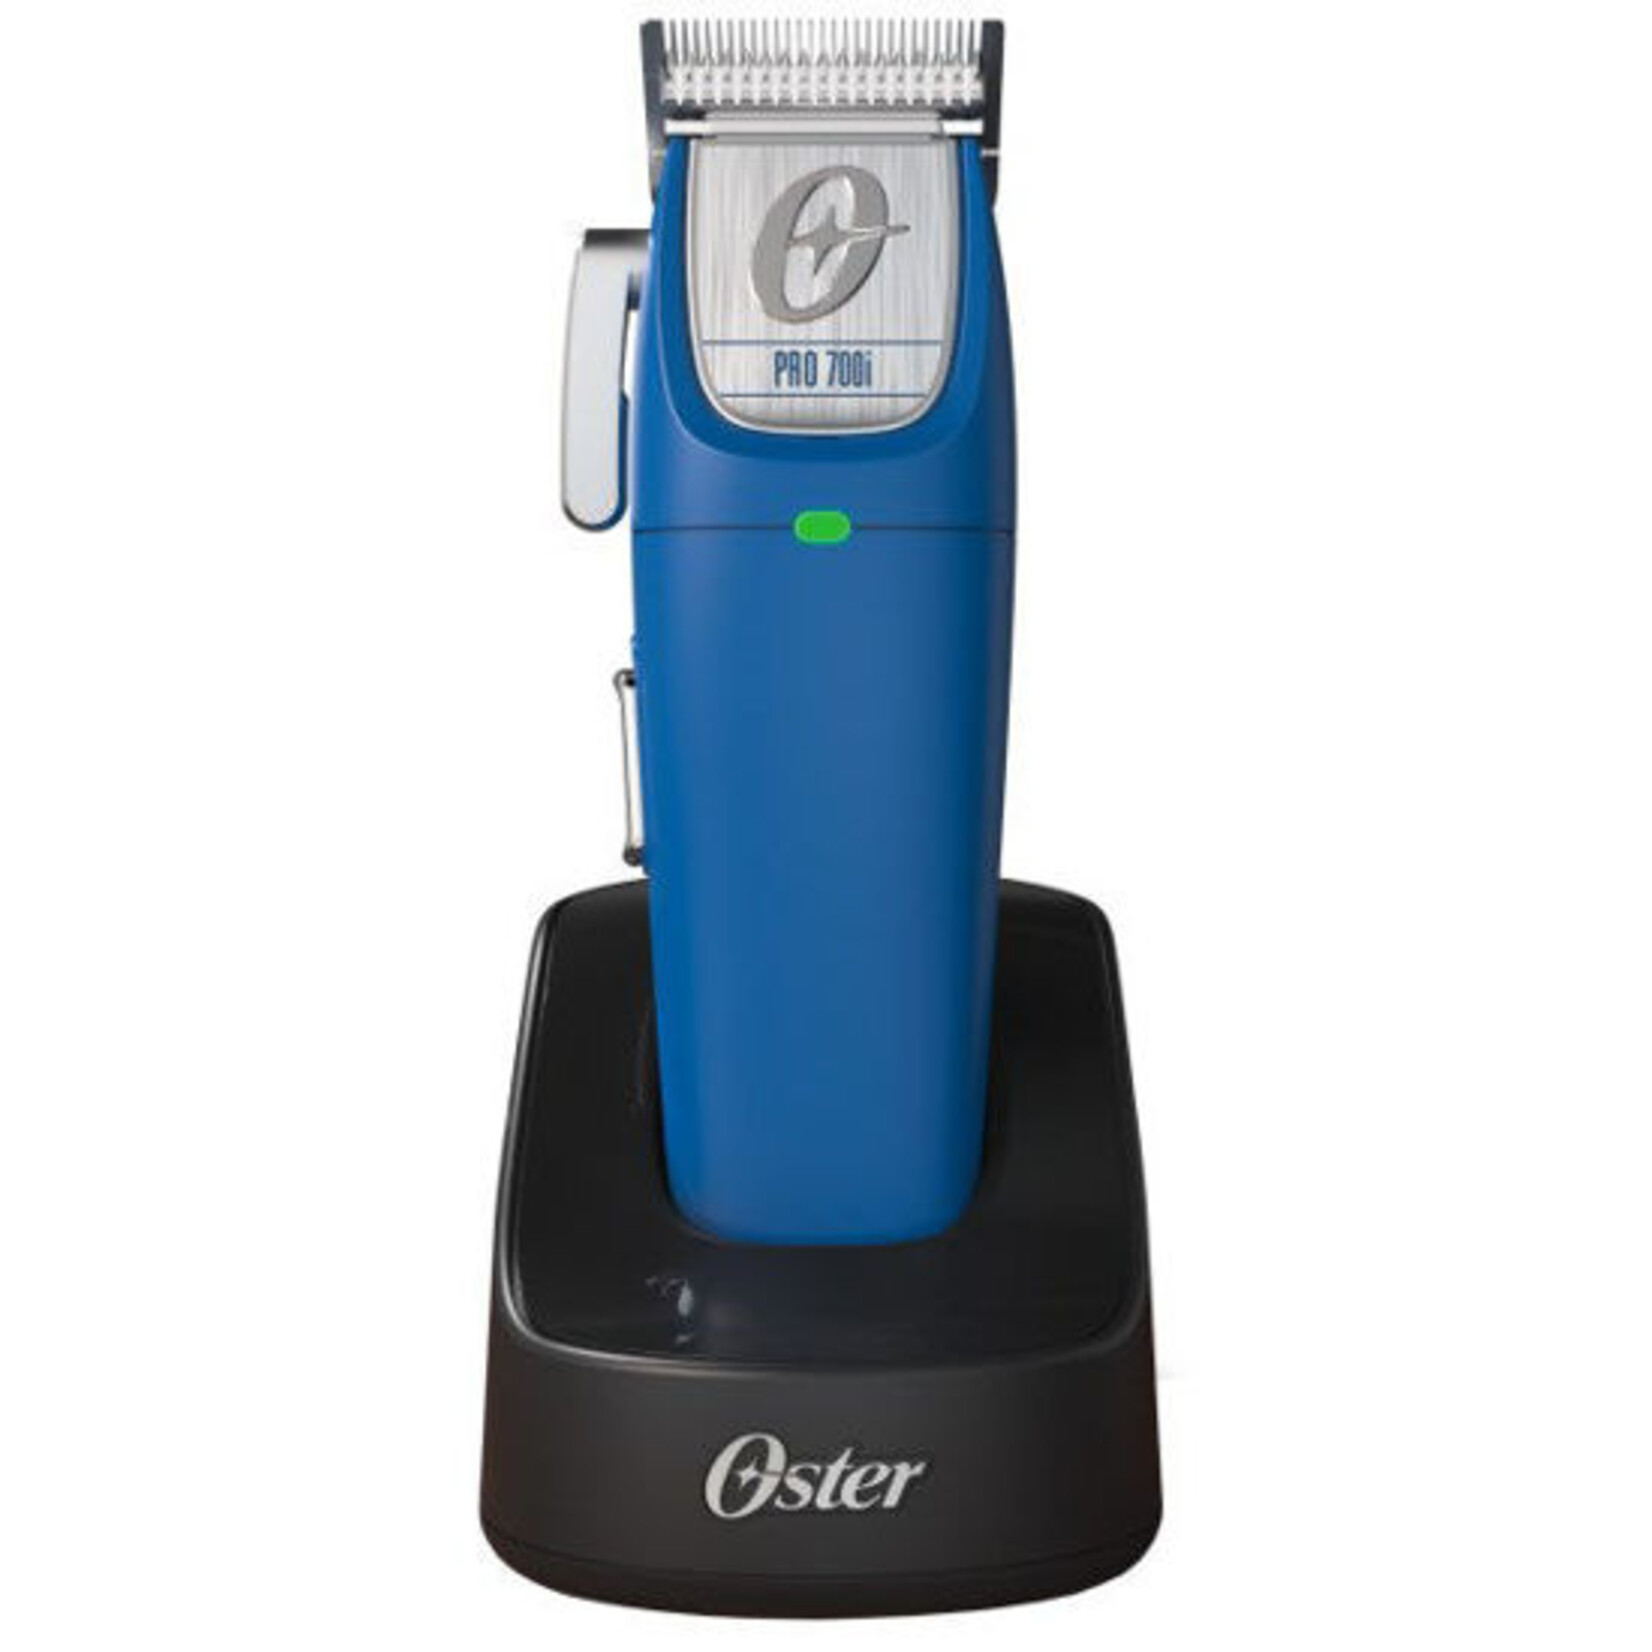 Oster Oster tondeuse Pro 700i